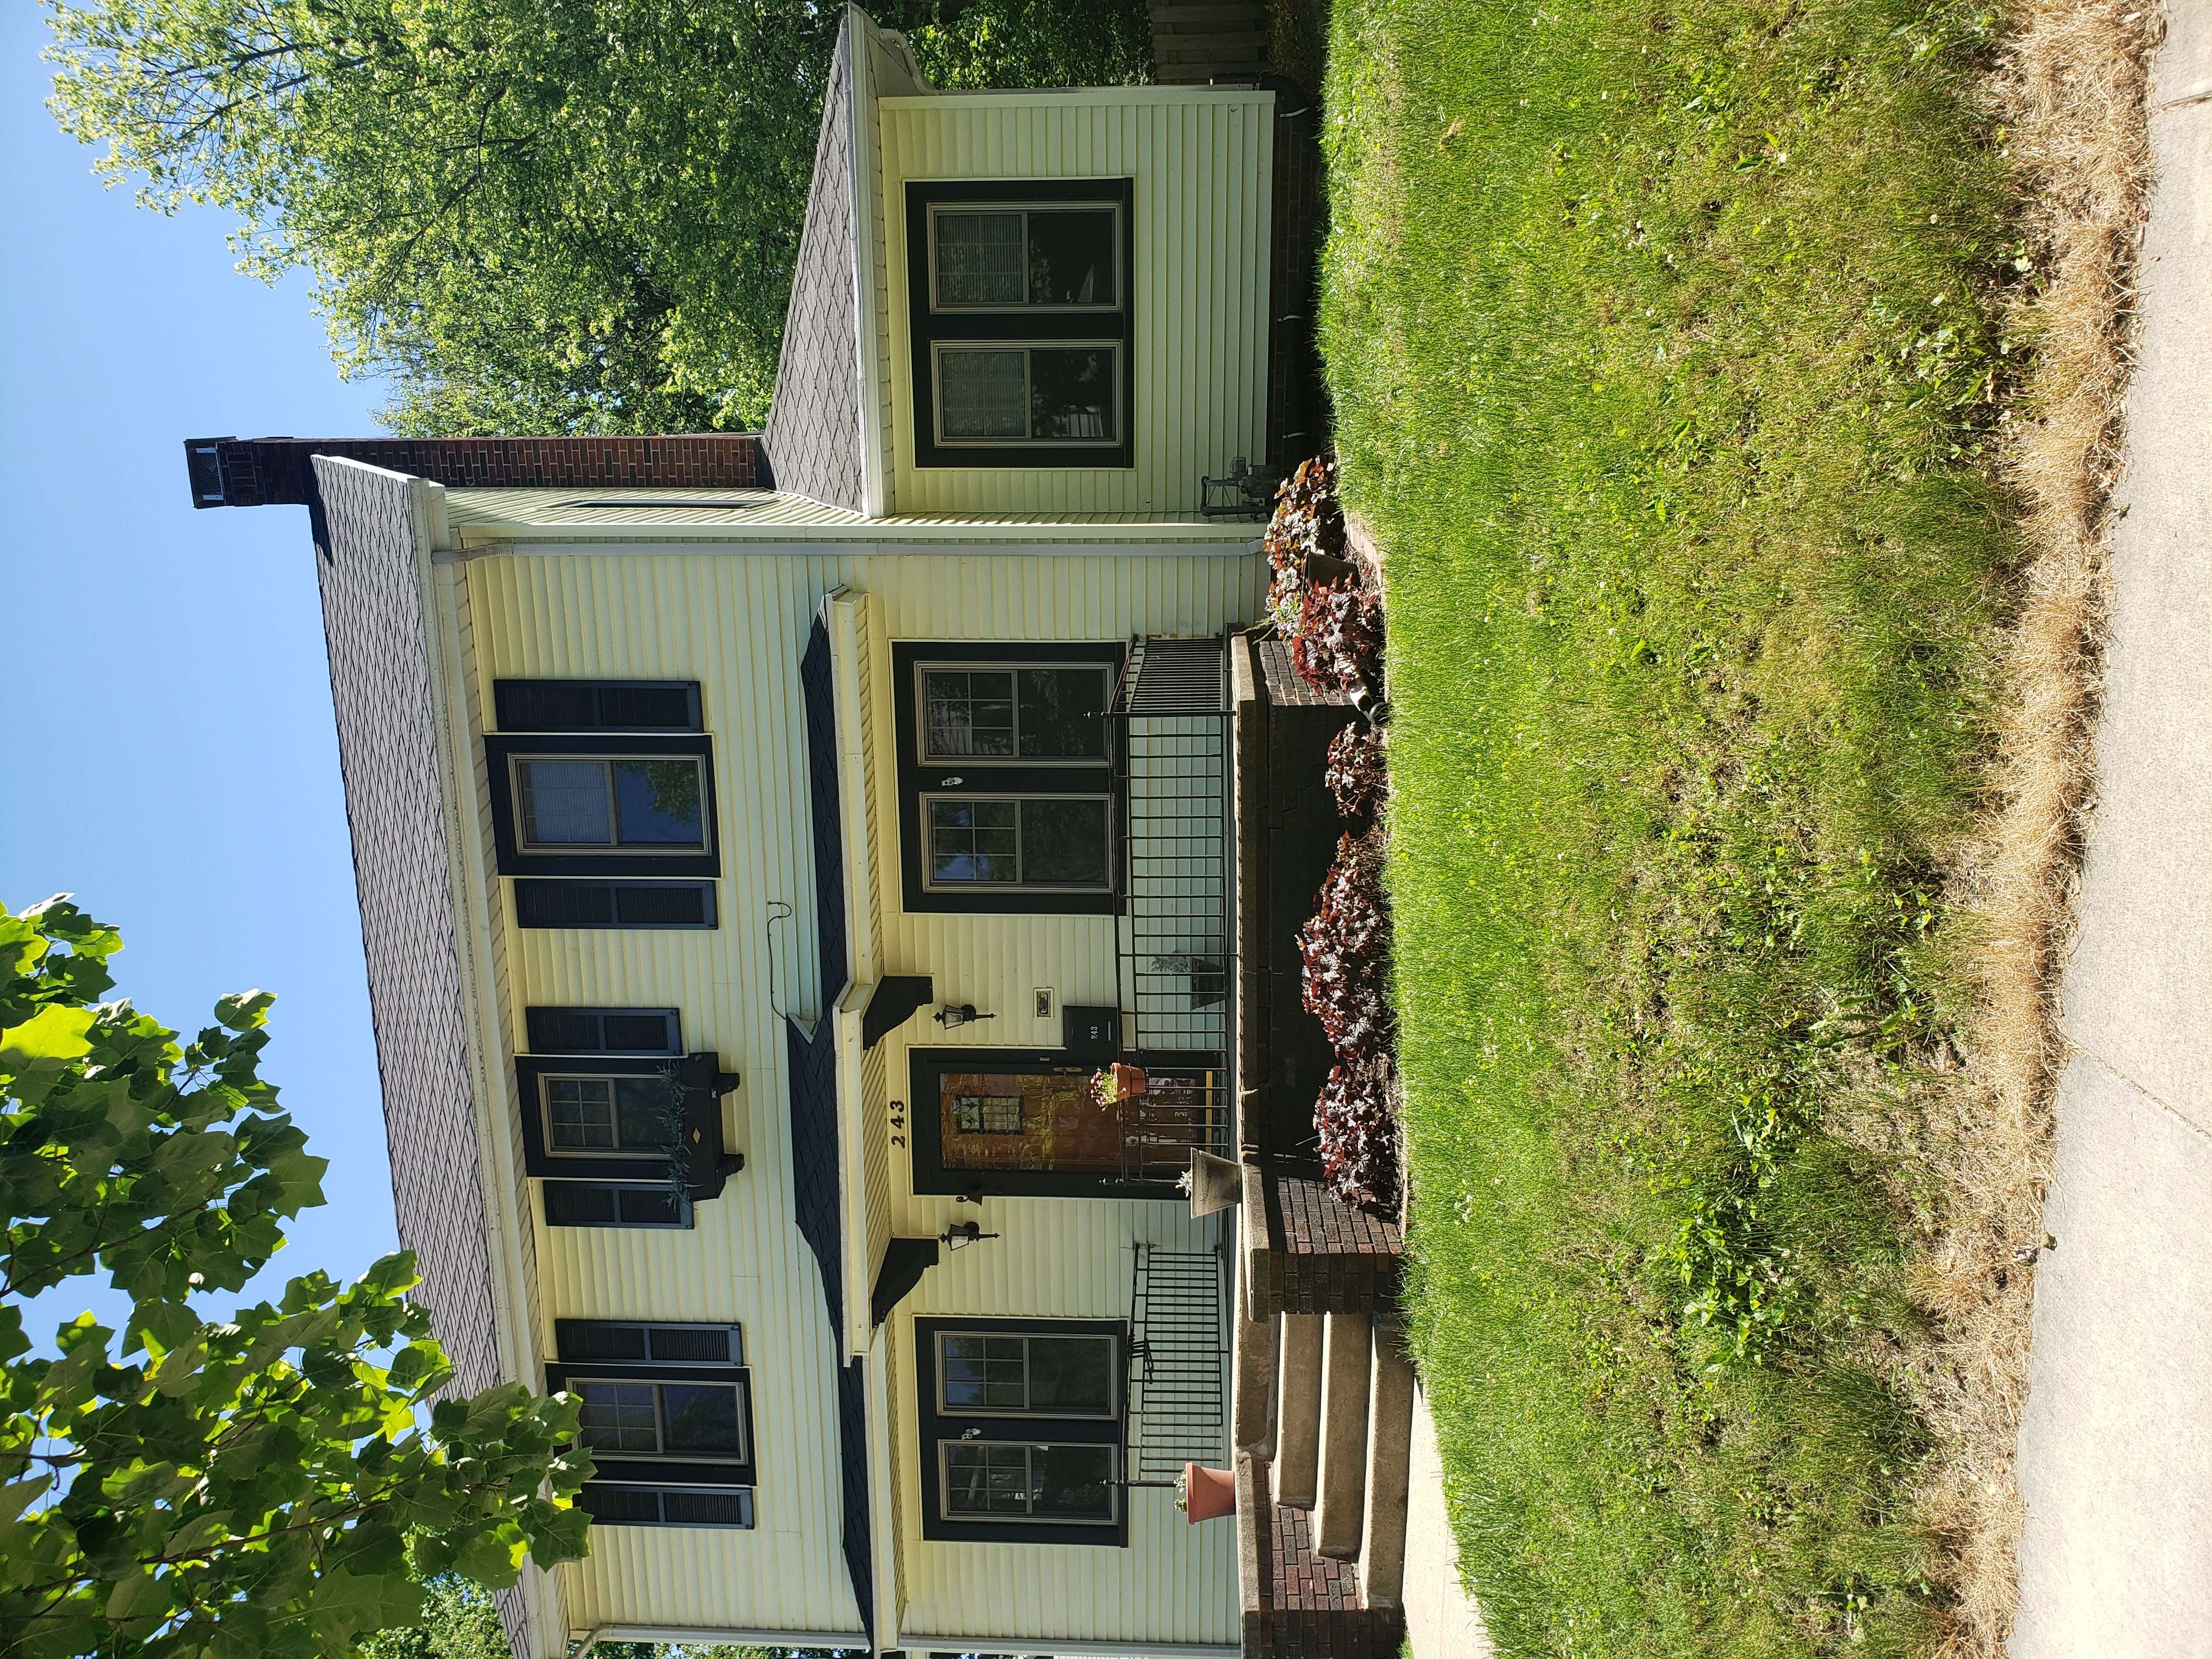 find-apartments/Connolly-Street/243-Connolly-Street-West-Lafayette/1812